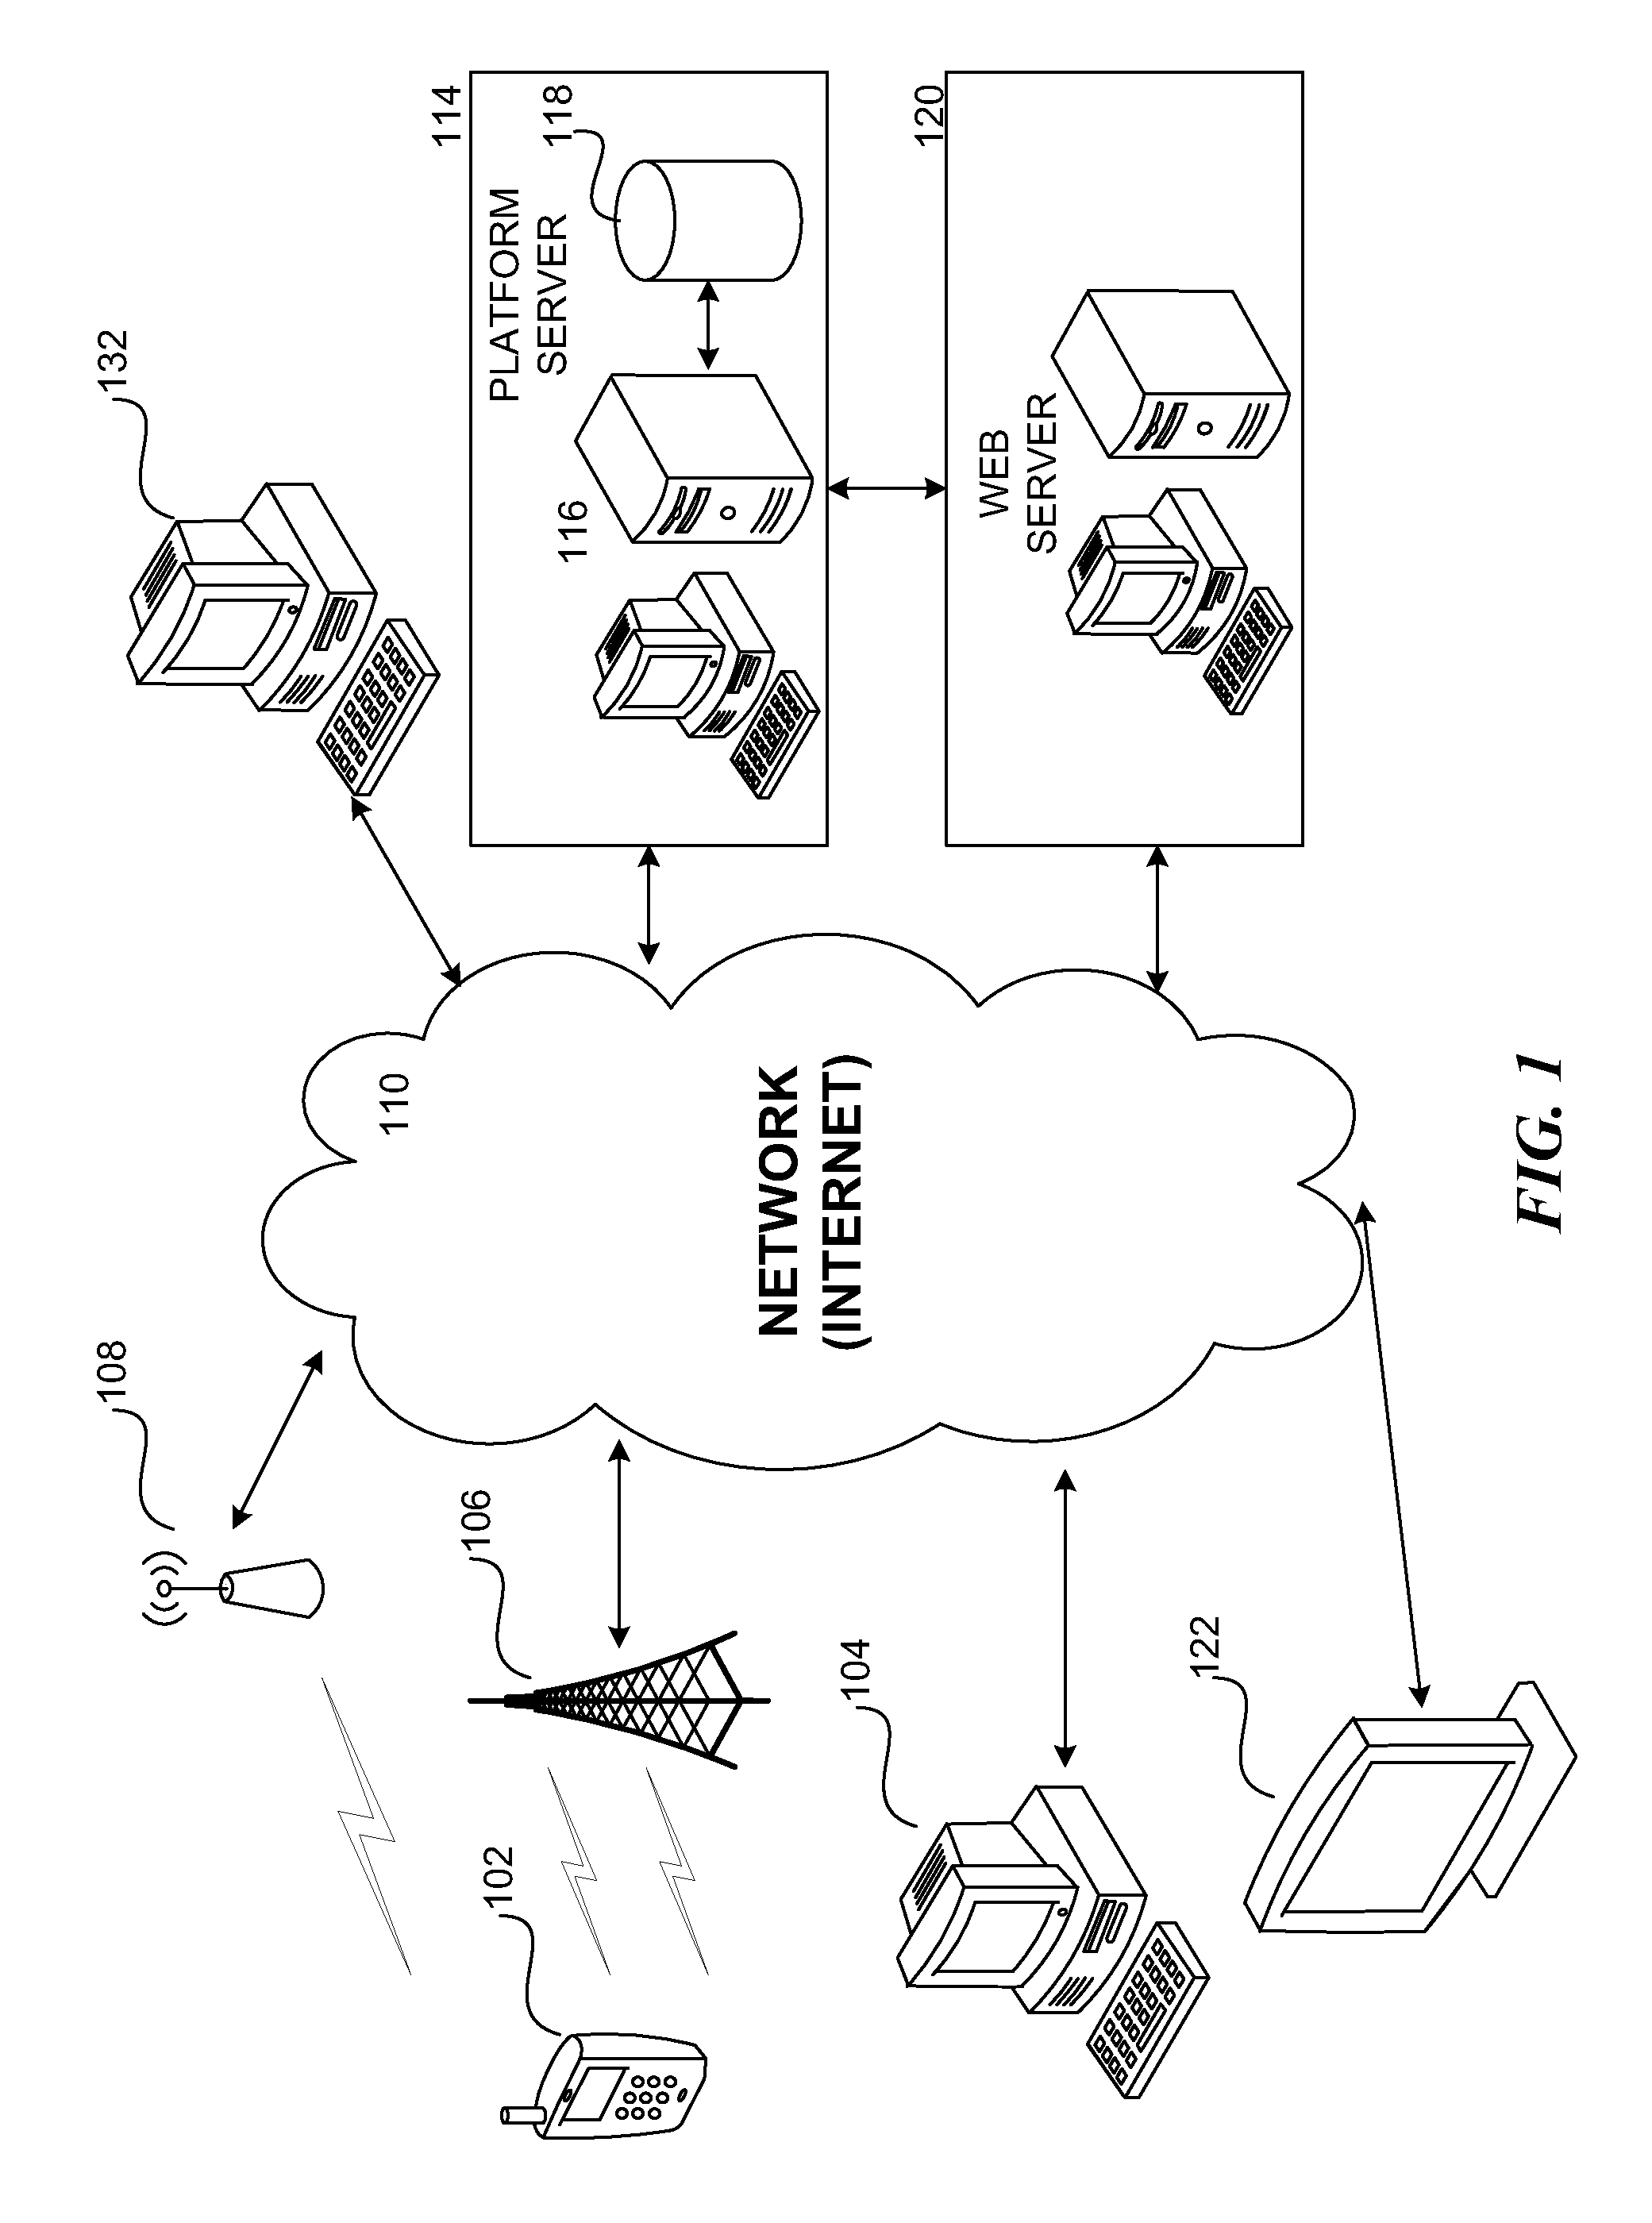 Methods and systems for processing and displaying advertisements of variable lengths